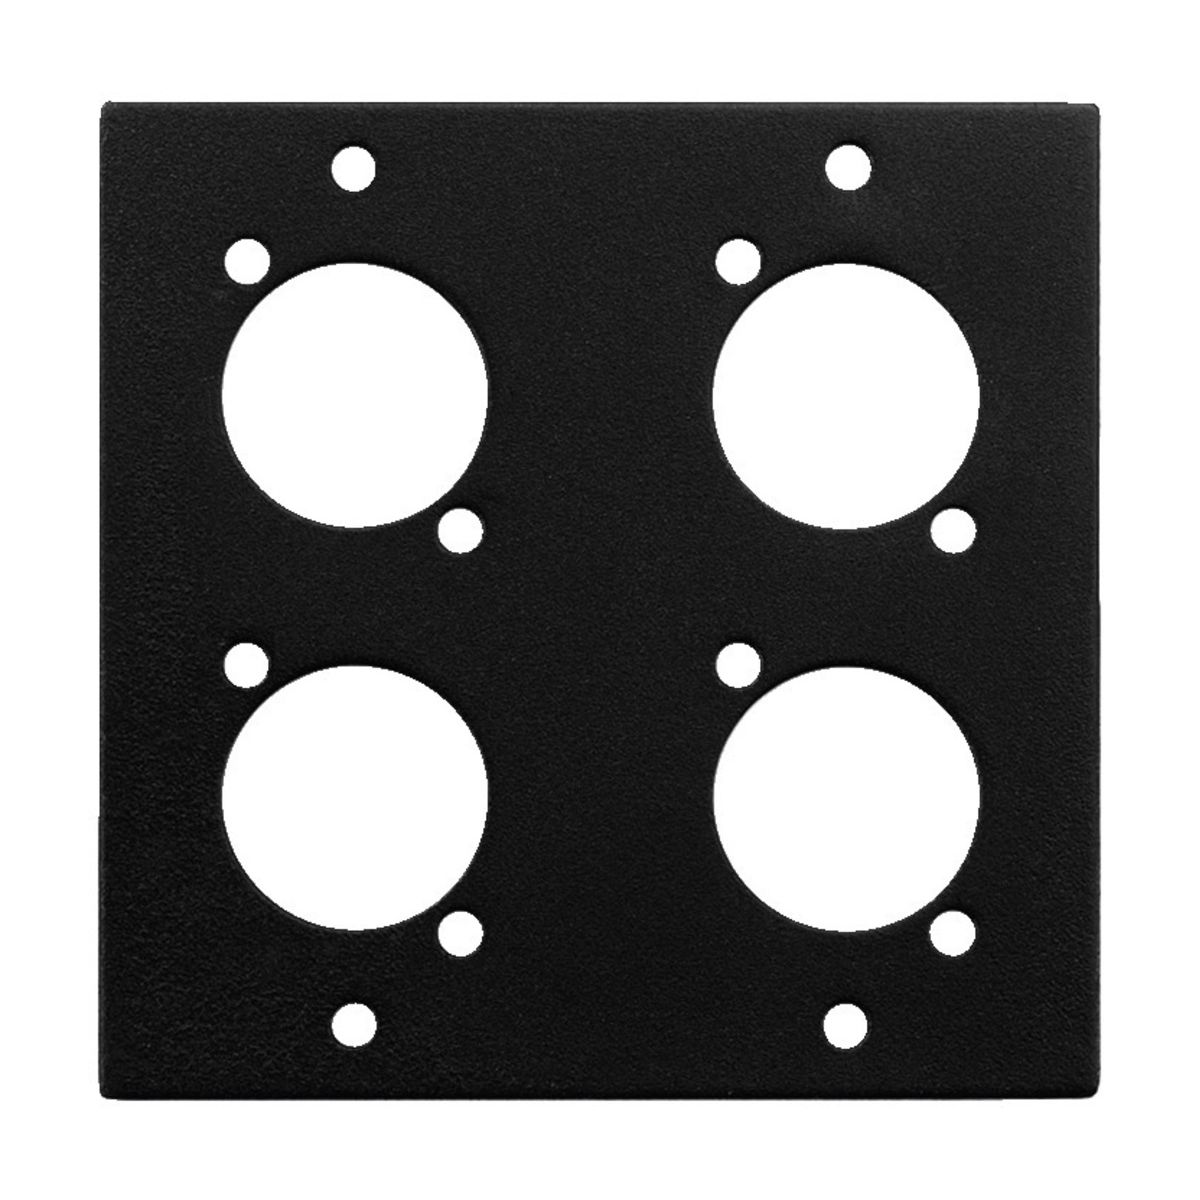 RSP-24D | 2-fold segment panel for RSP-10F-0